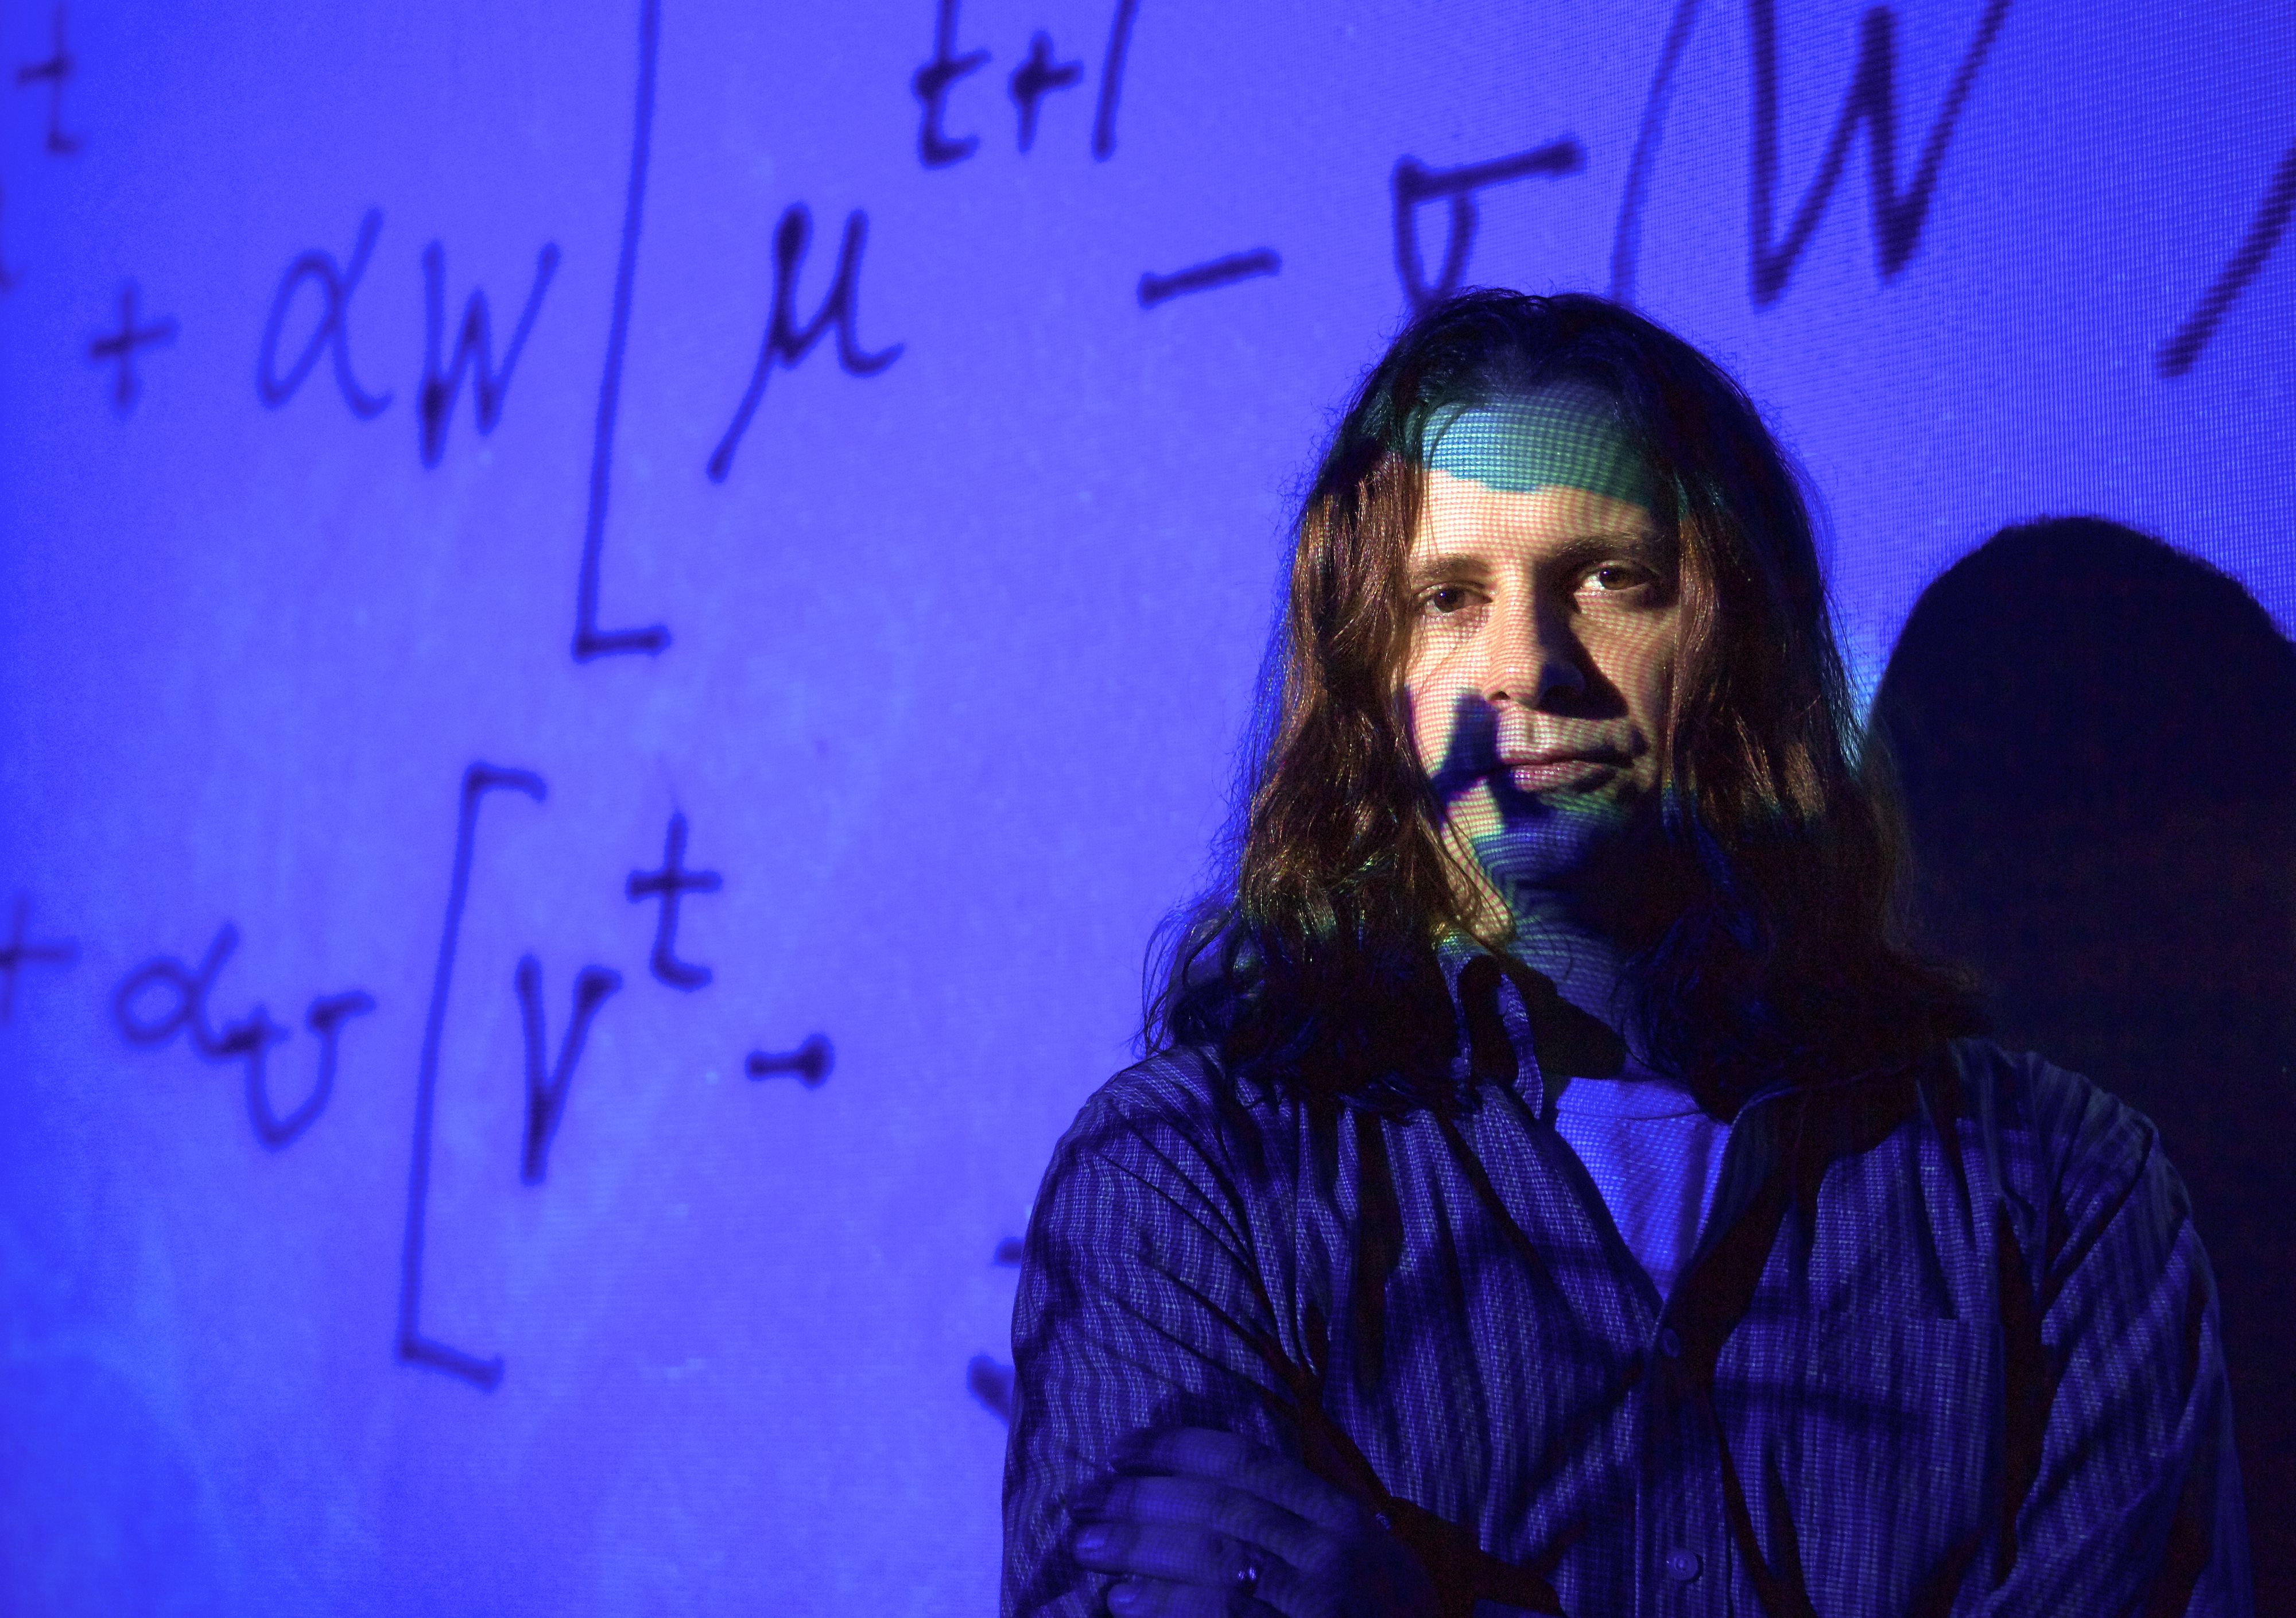 Portrait of physics professor on projected blue background with mathematical formulas